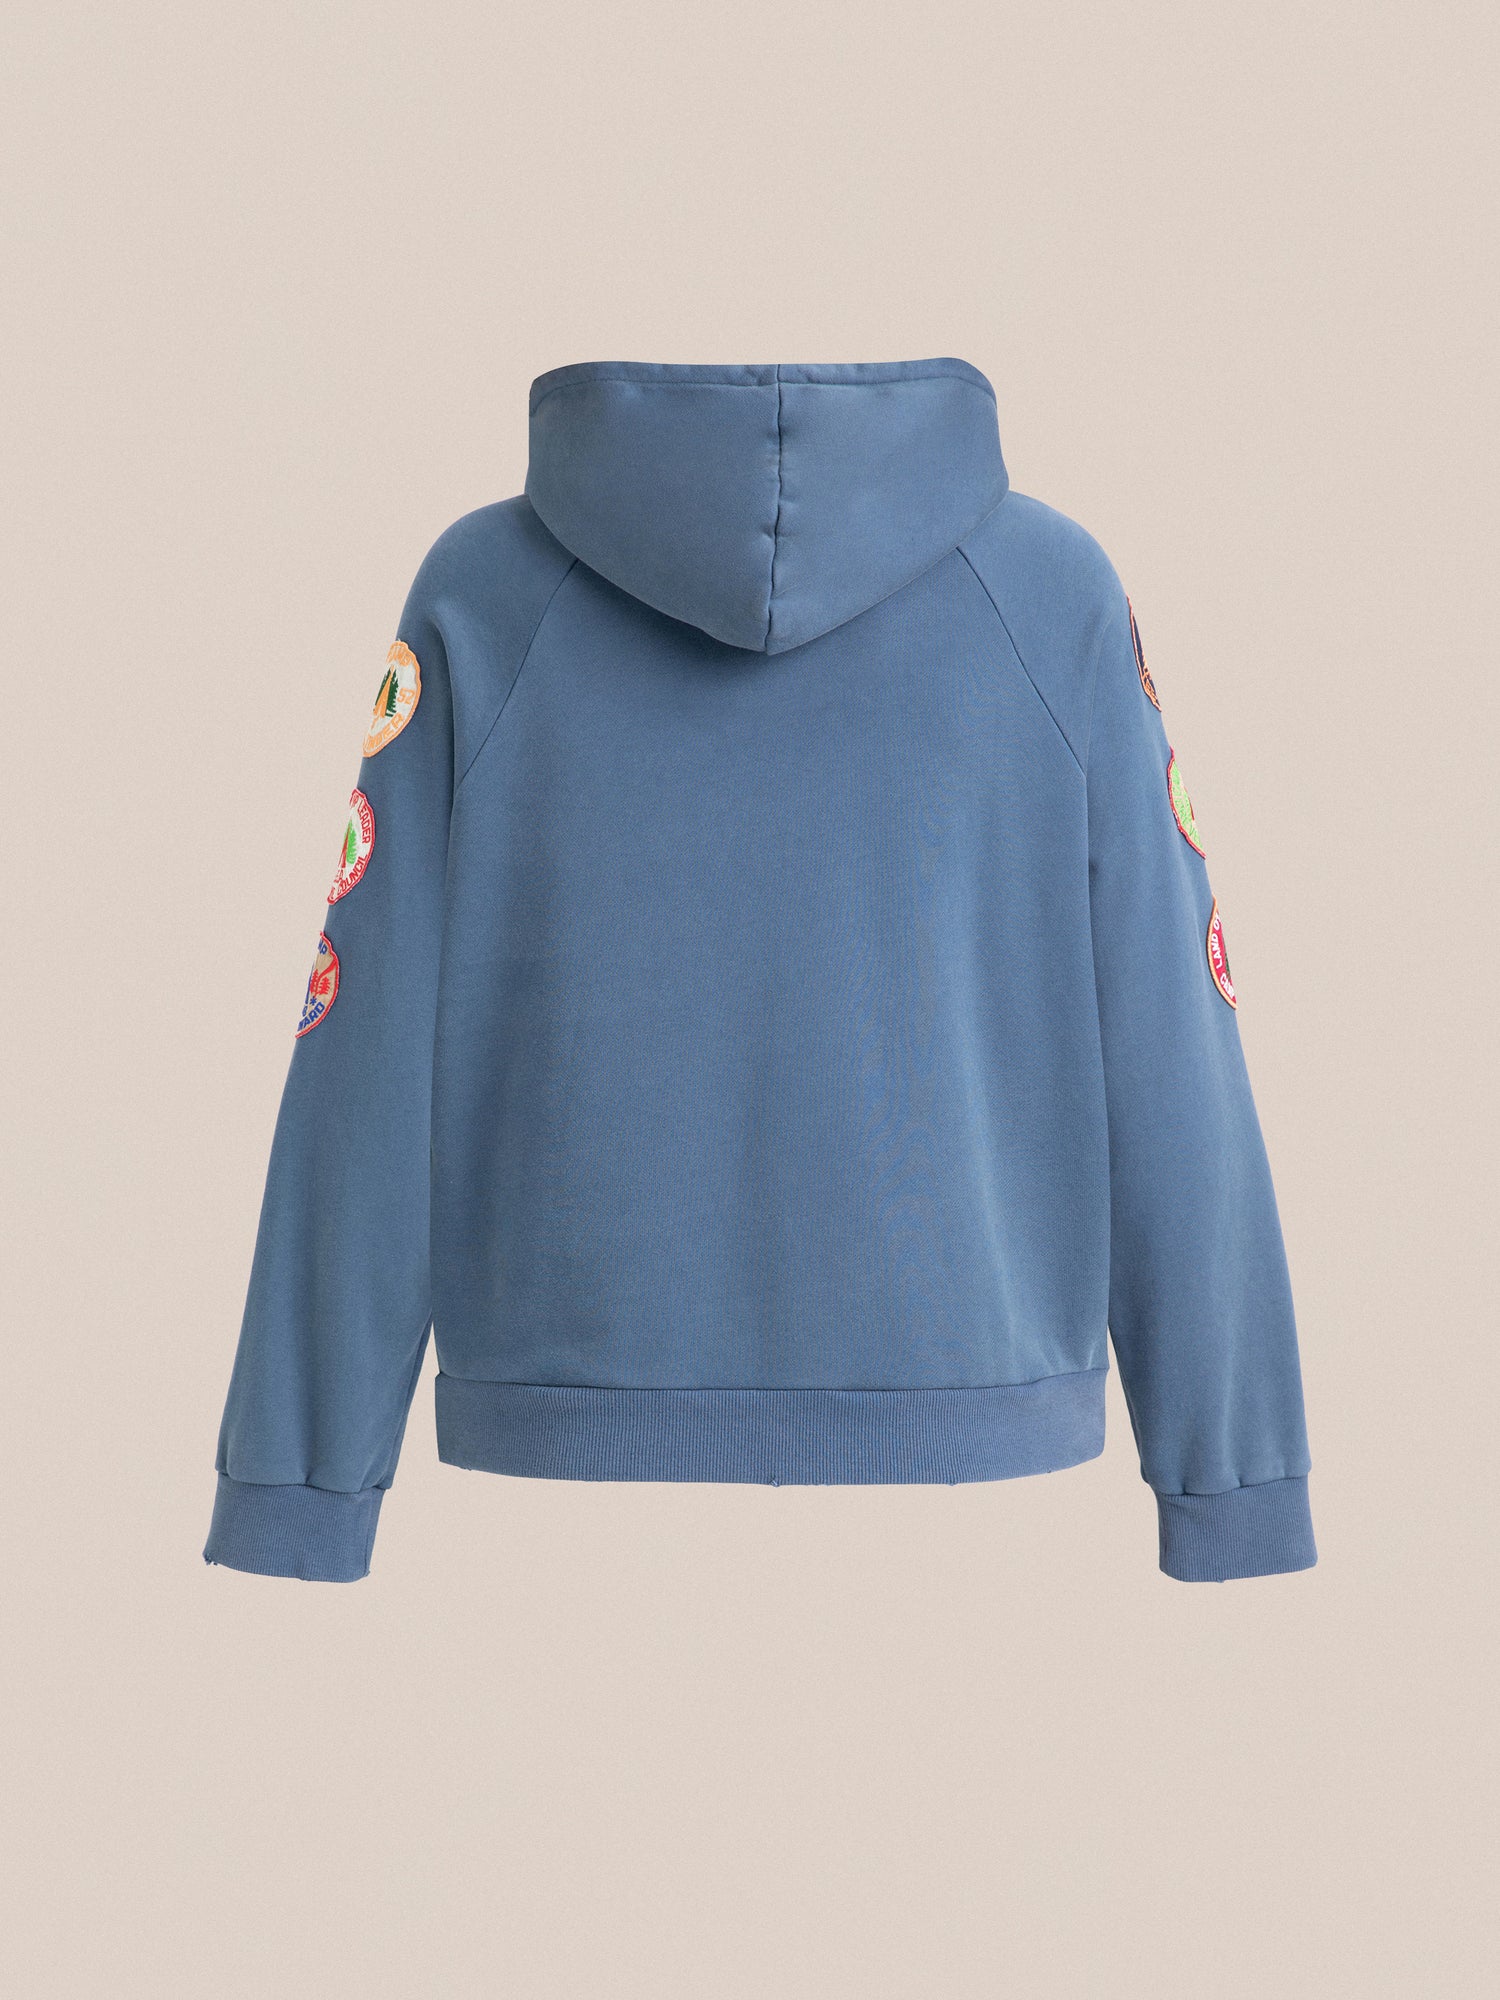 A child's Found Timber Campground Hoodie with colorful appliques and distressed details.